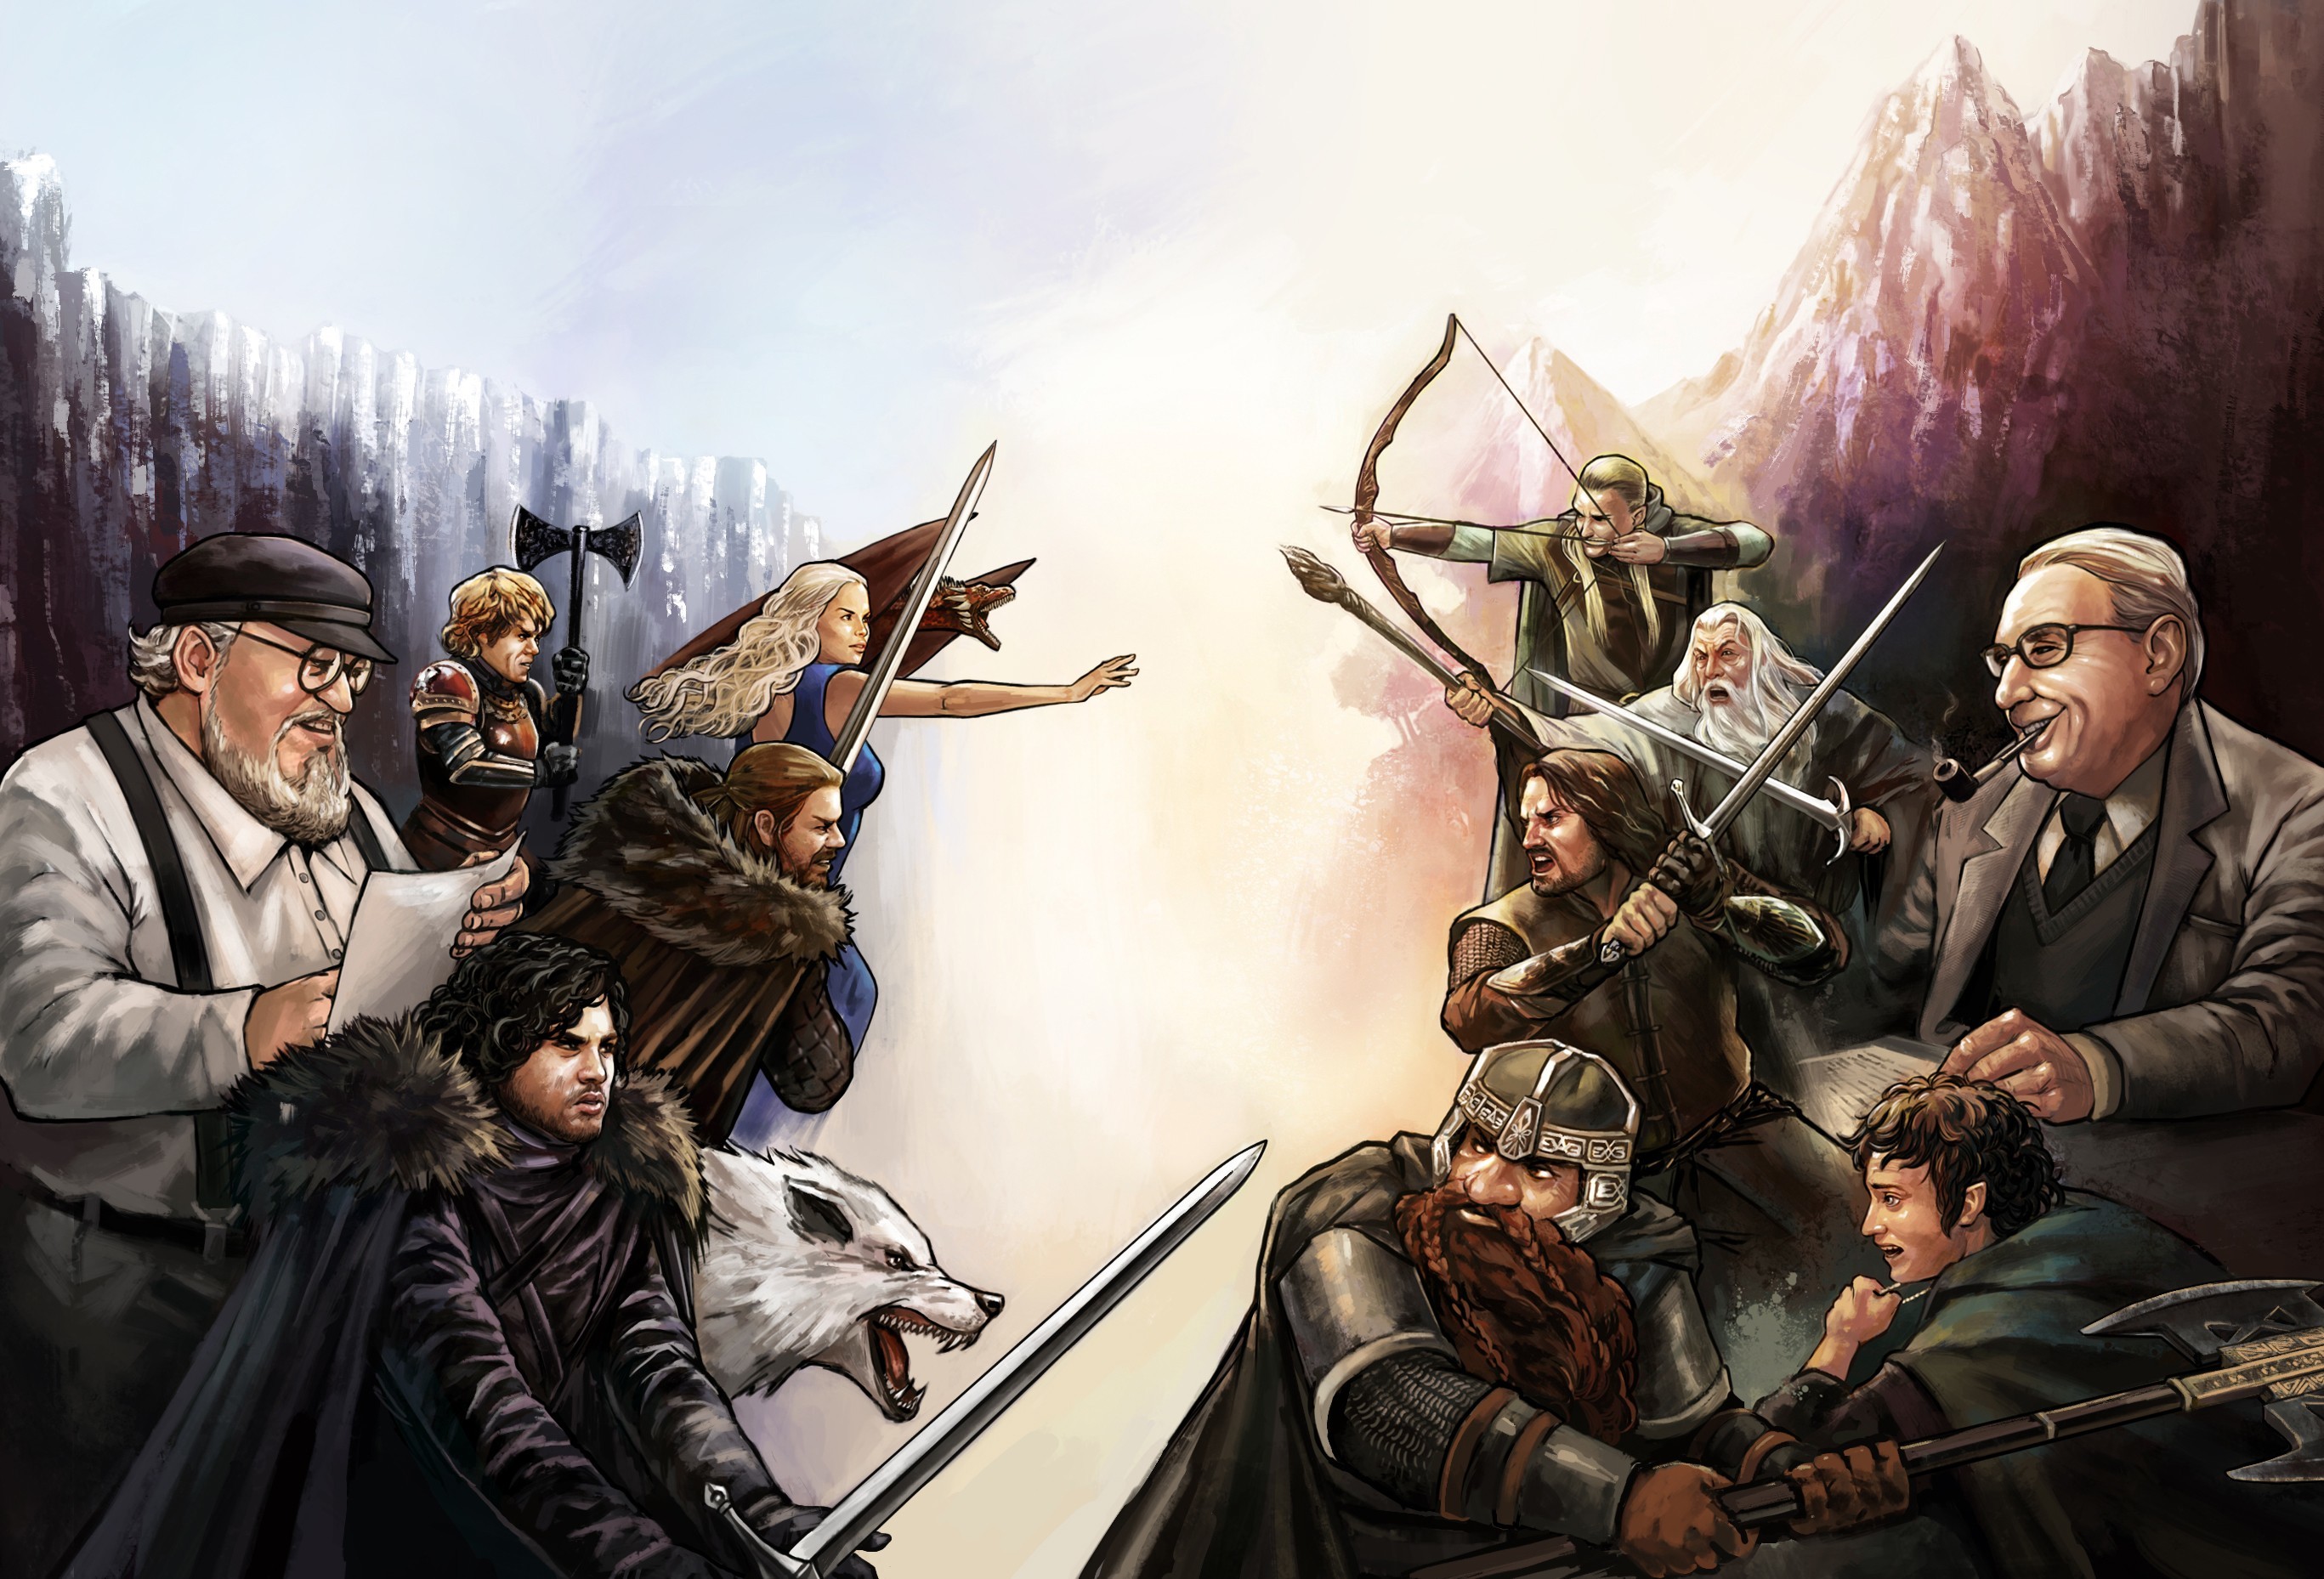 2734x1858 General  Game of Thrones The Lord of the Rings George R. R. Martin  J. R. R. Tolkien Jon